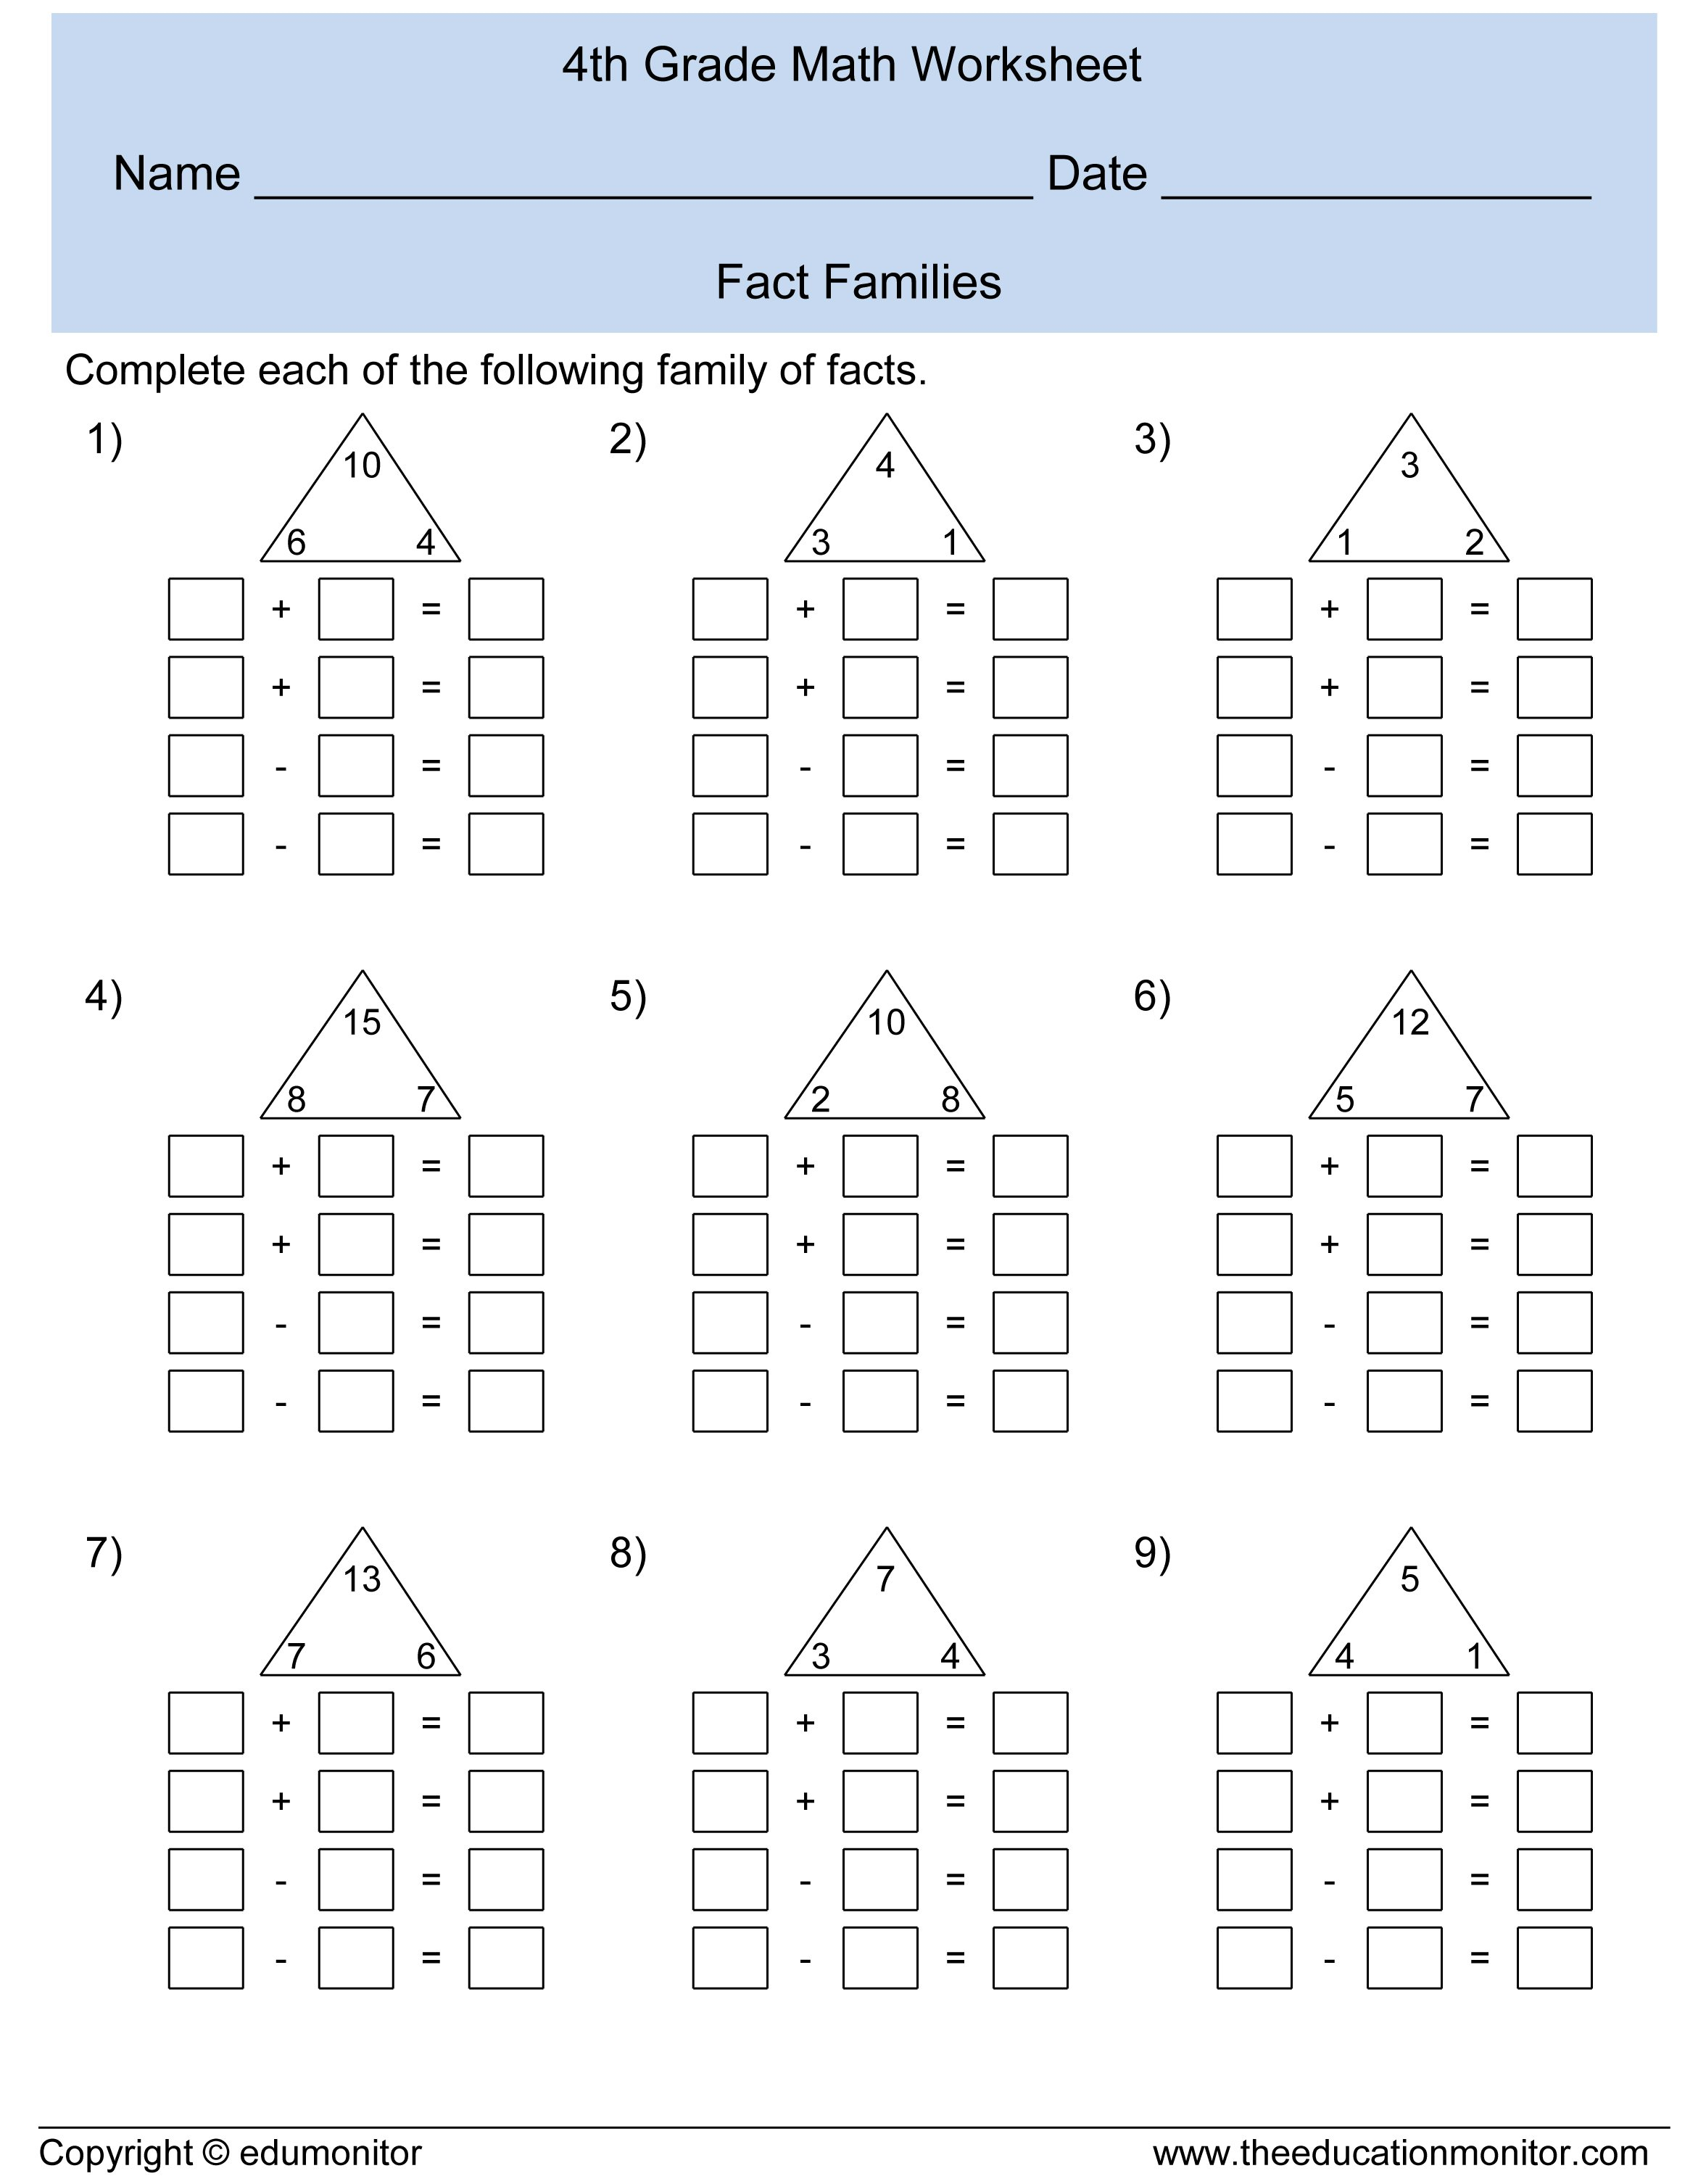 Free Printable Fact Families Math Worksheets Intended For Fact Family Worksheets